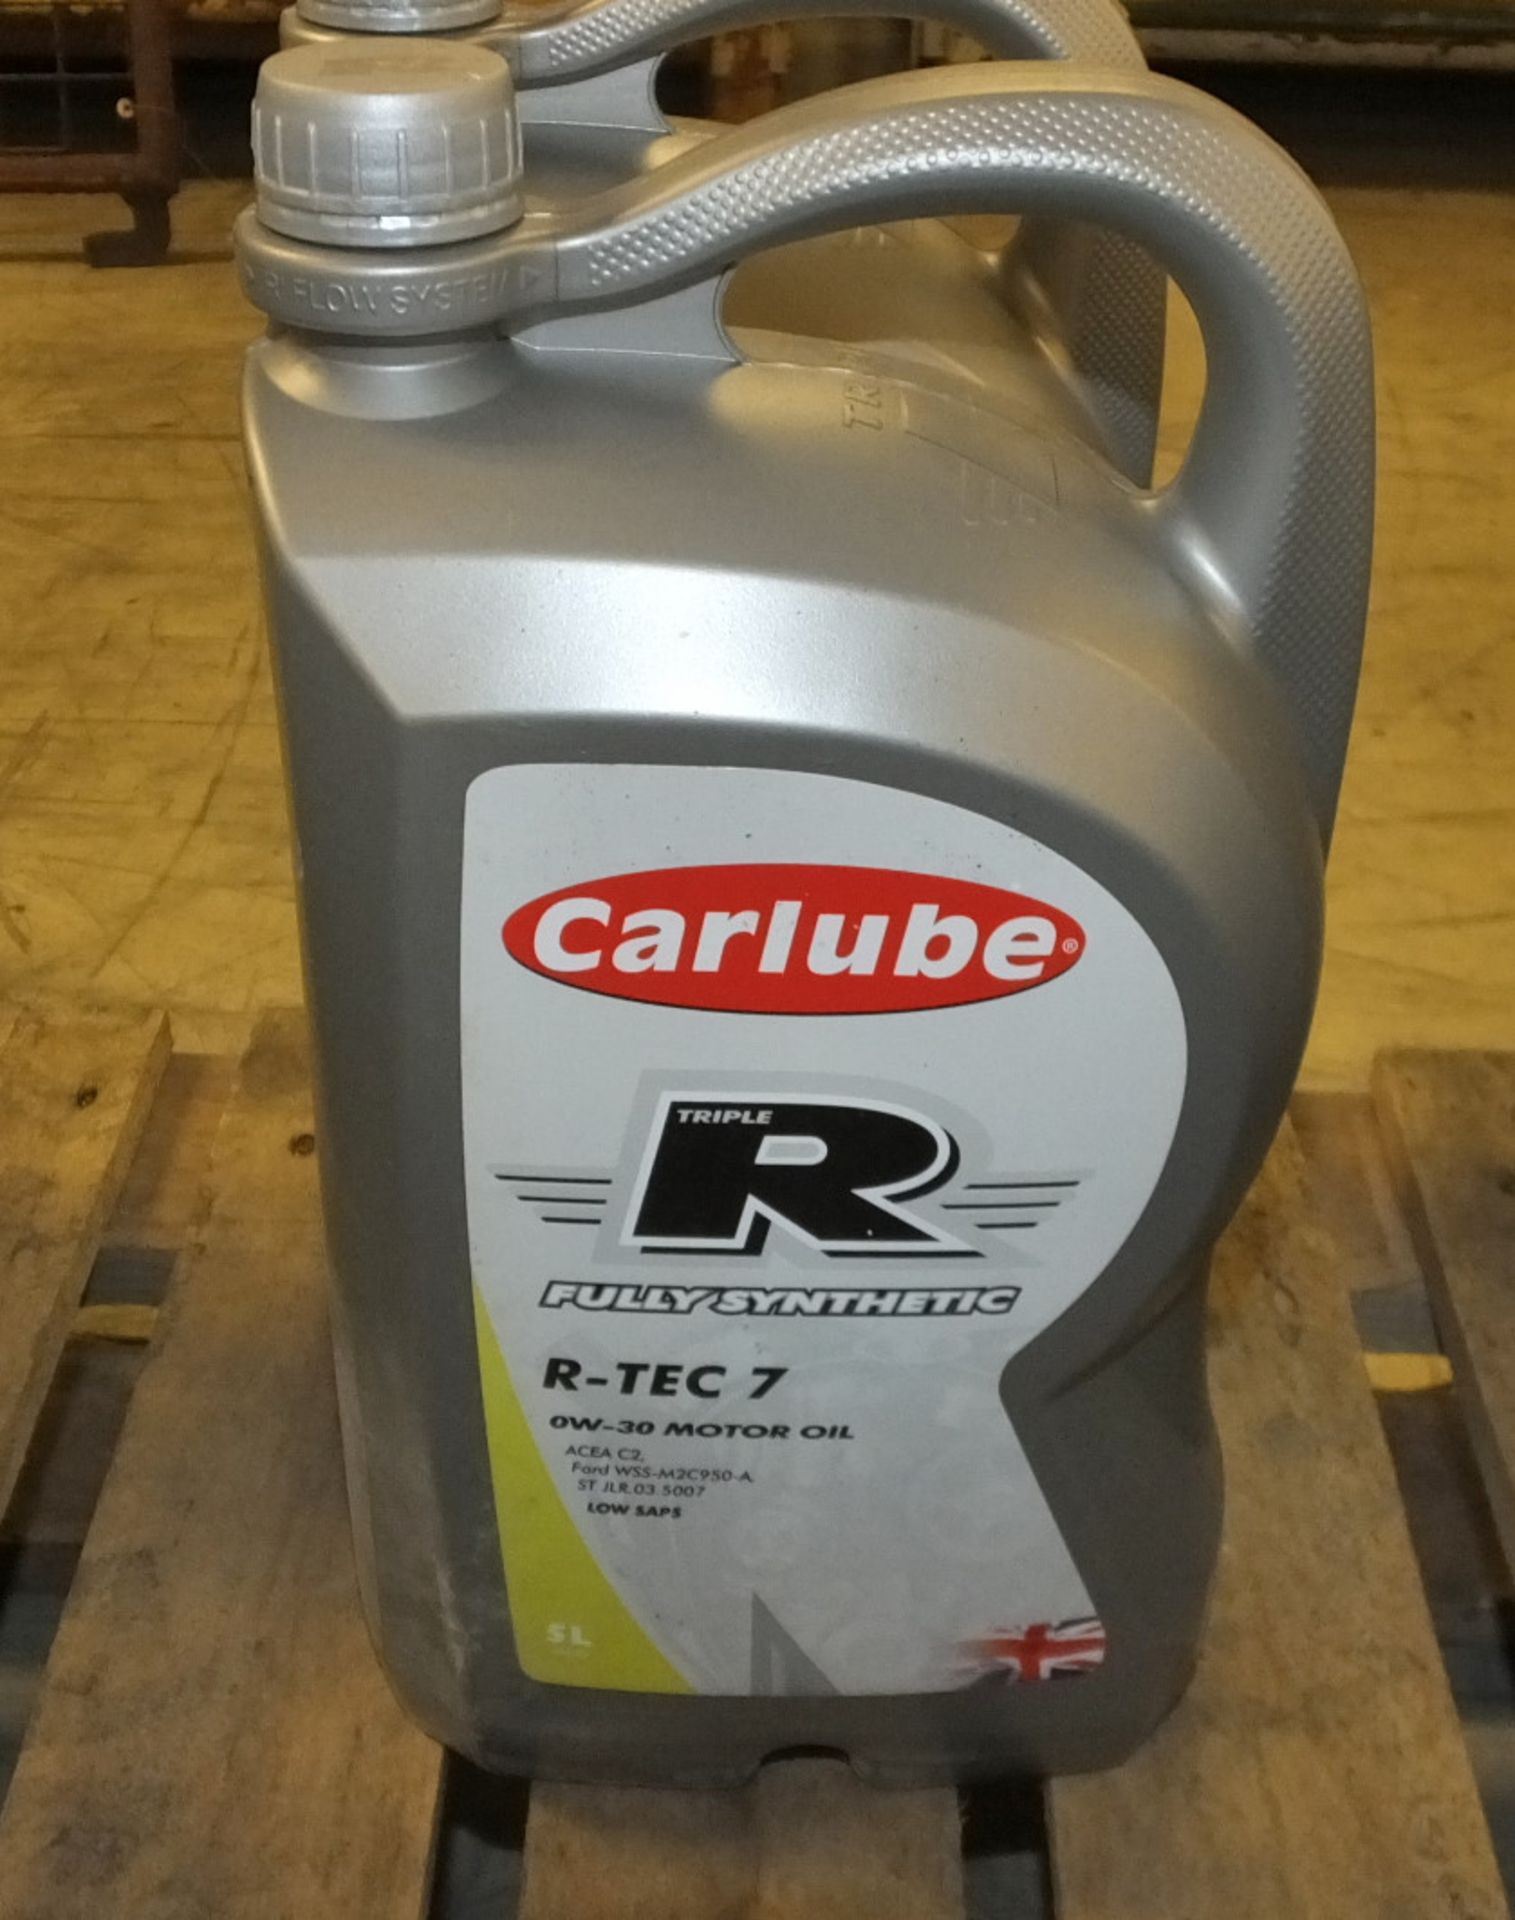 1x Carlube Triple R Semi Synthetic R-Tec 31 oil - 10W-40, 1x Fully Synthetic R-Tec 7 - 0W-30 & more - Image 2 of 3